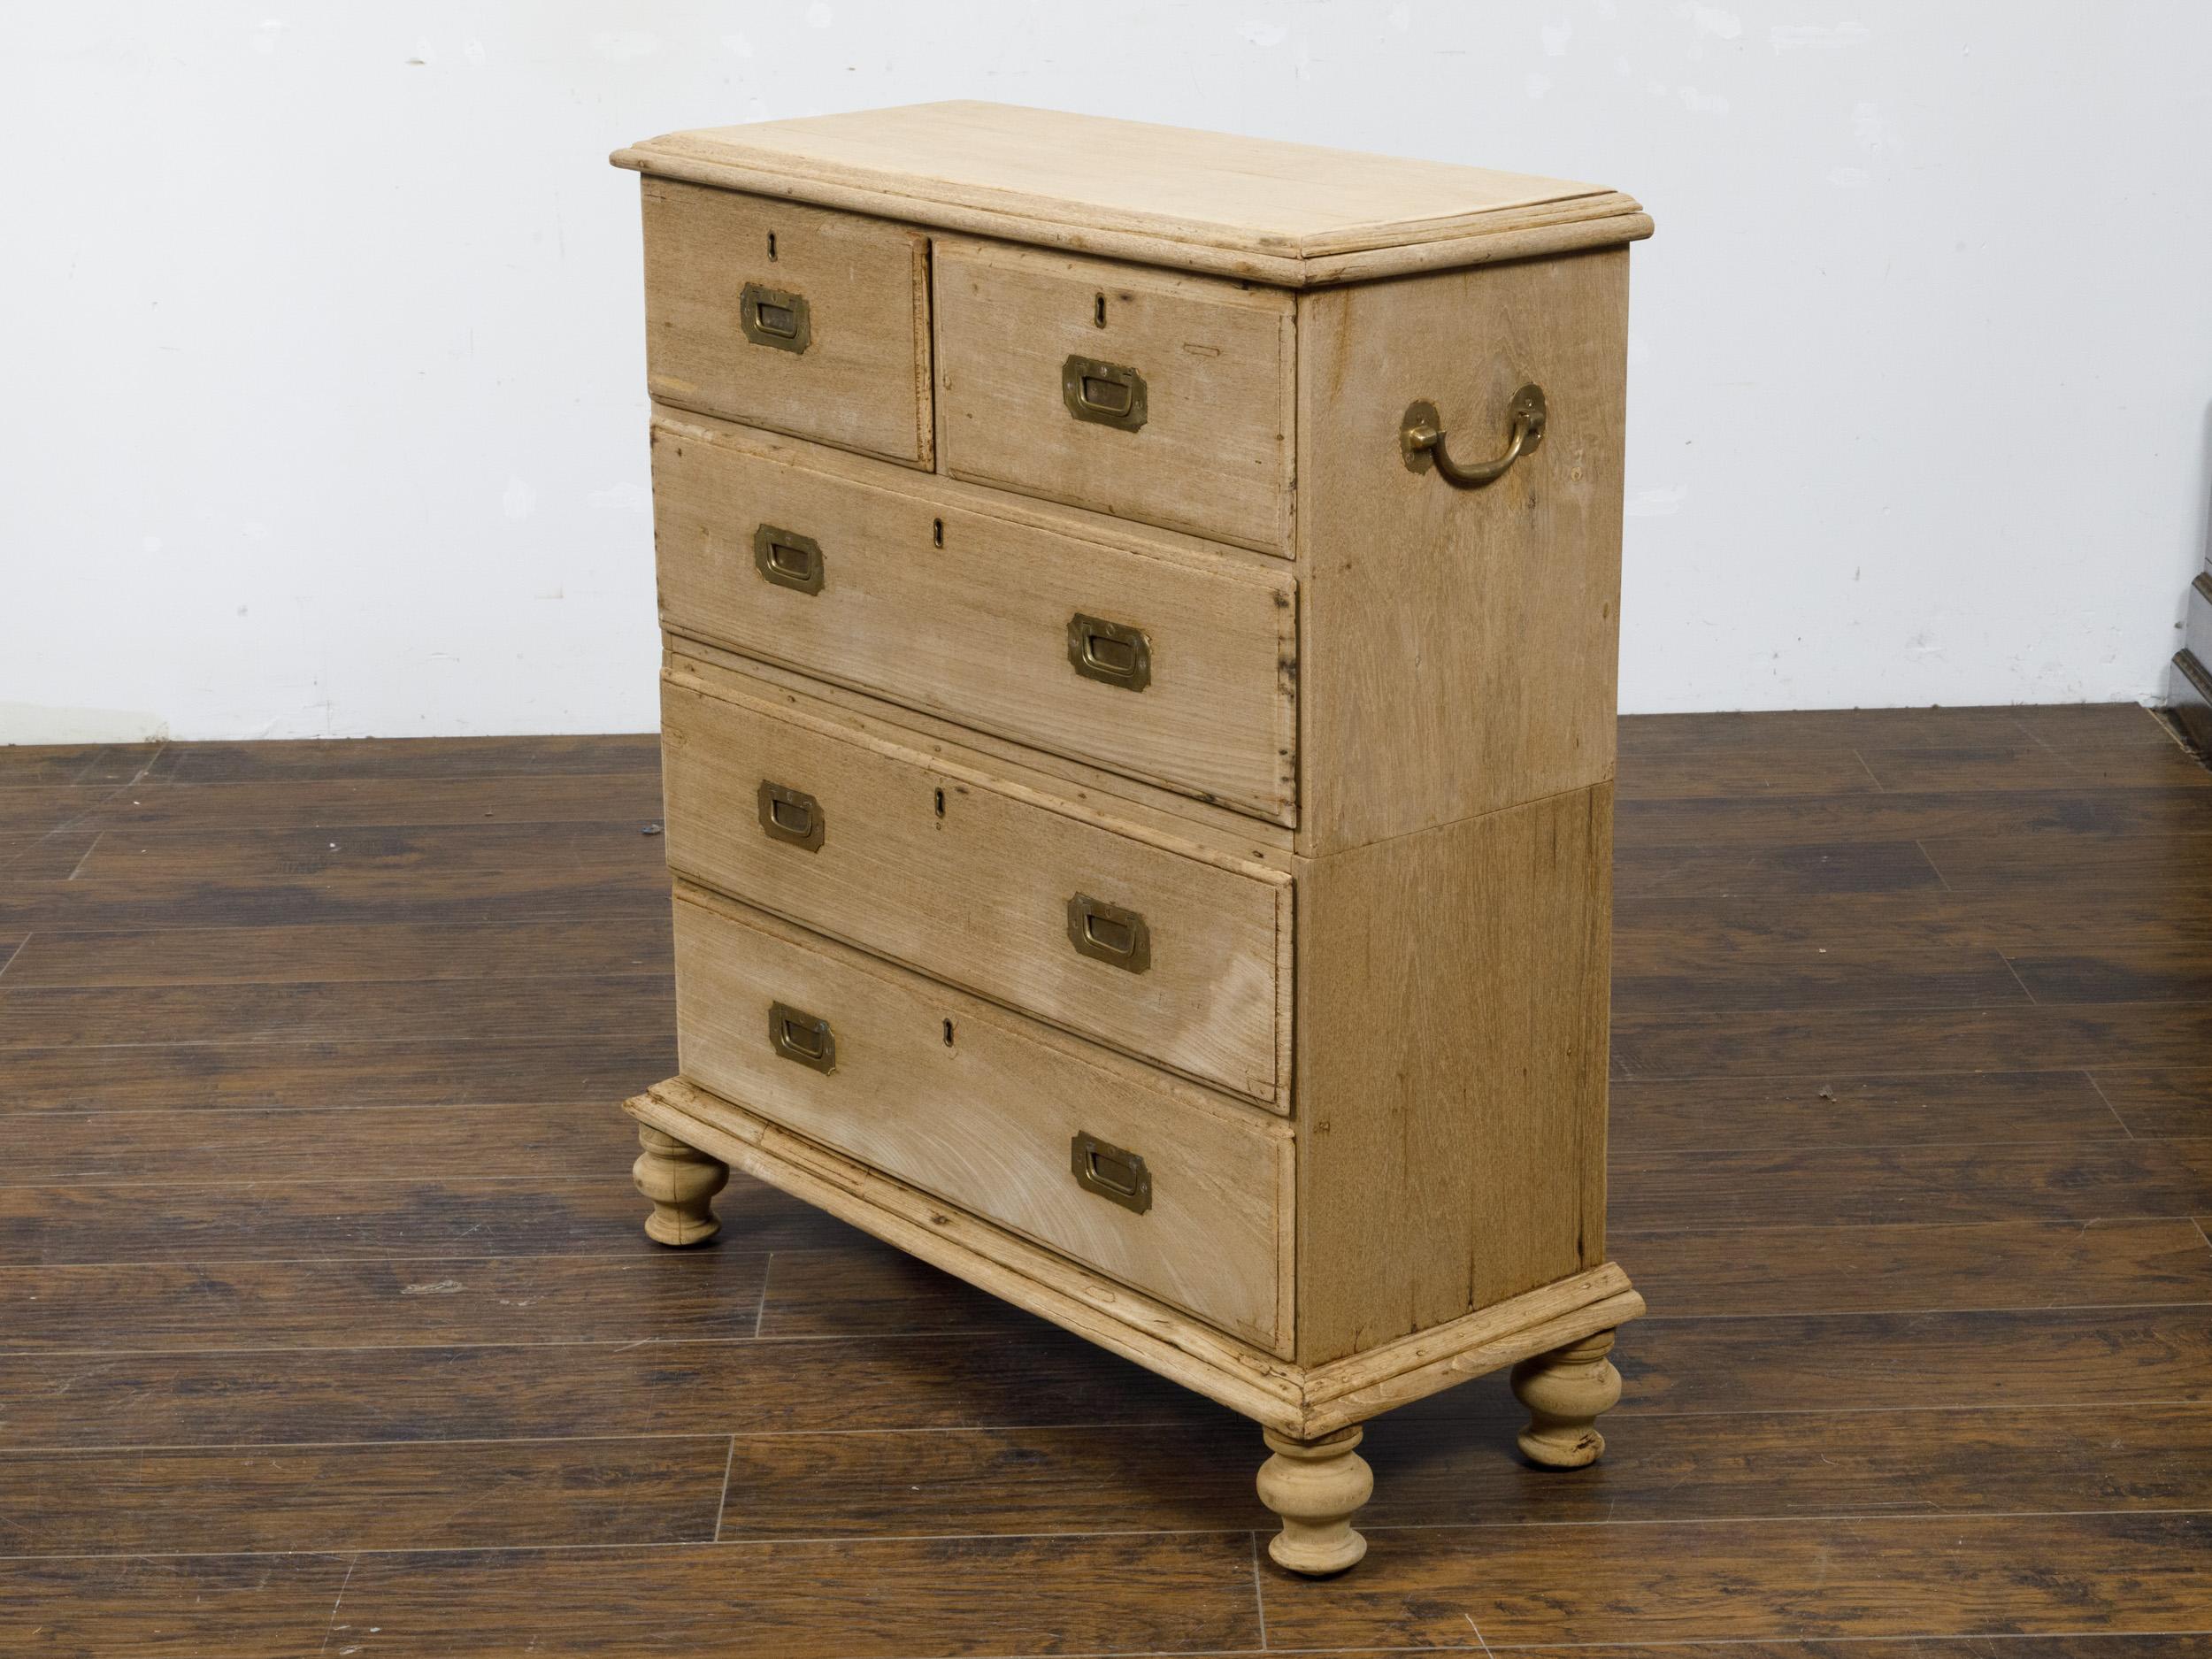 An English bleached wood two-part chest from the 19th century with five drawers, inset brass hardware and turned feet. This English two-part chest, crafted in the 19th century, embodies a blend of classic elegance and subtle rustic charm. Featuring